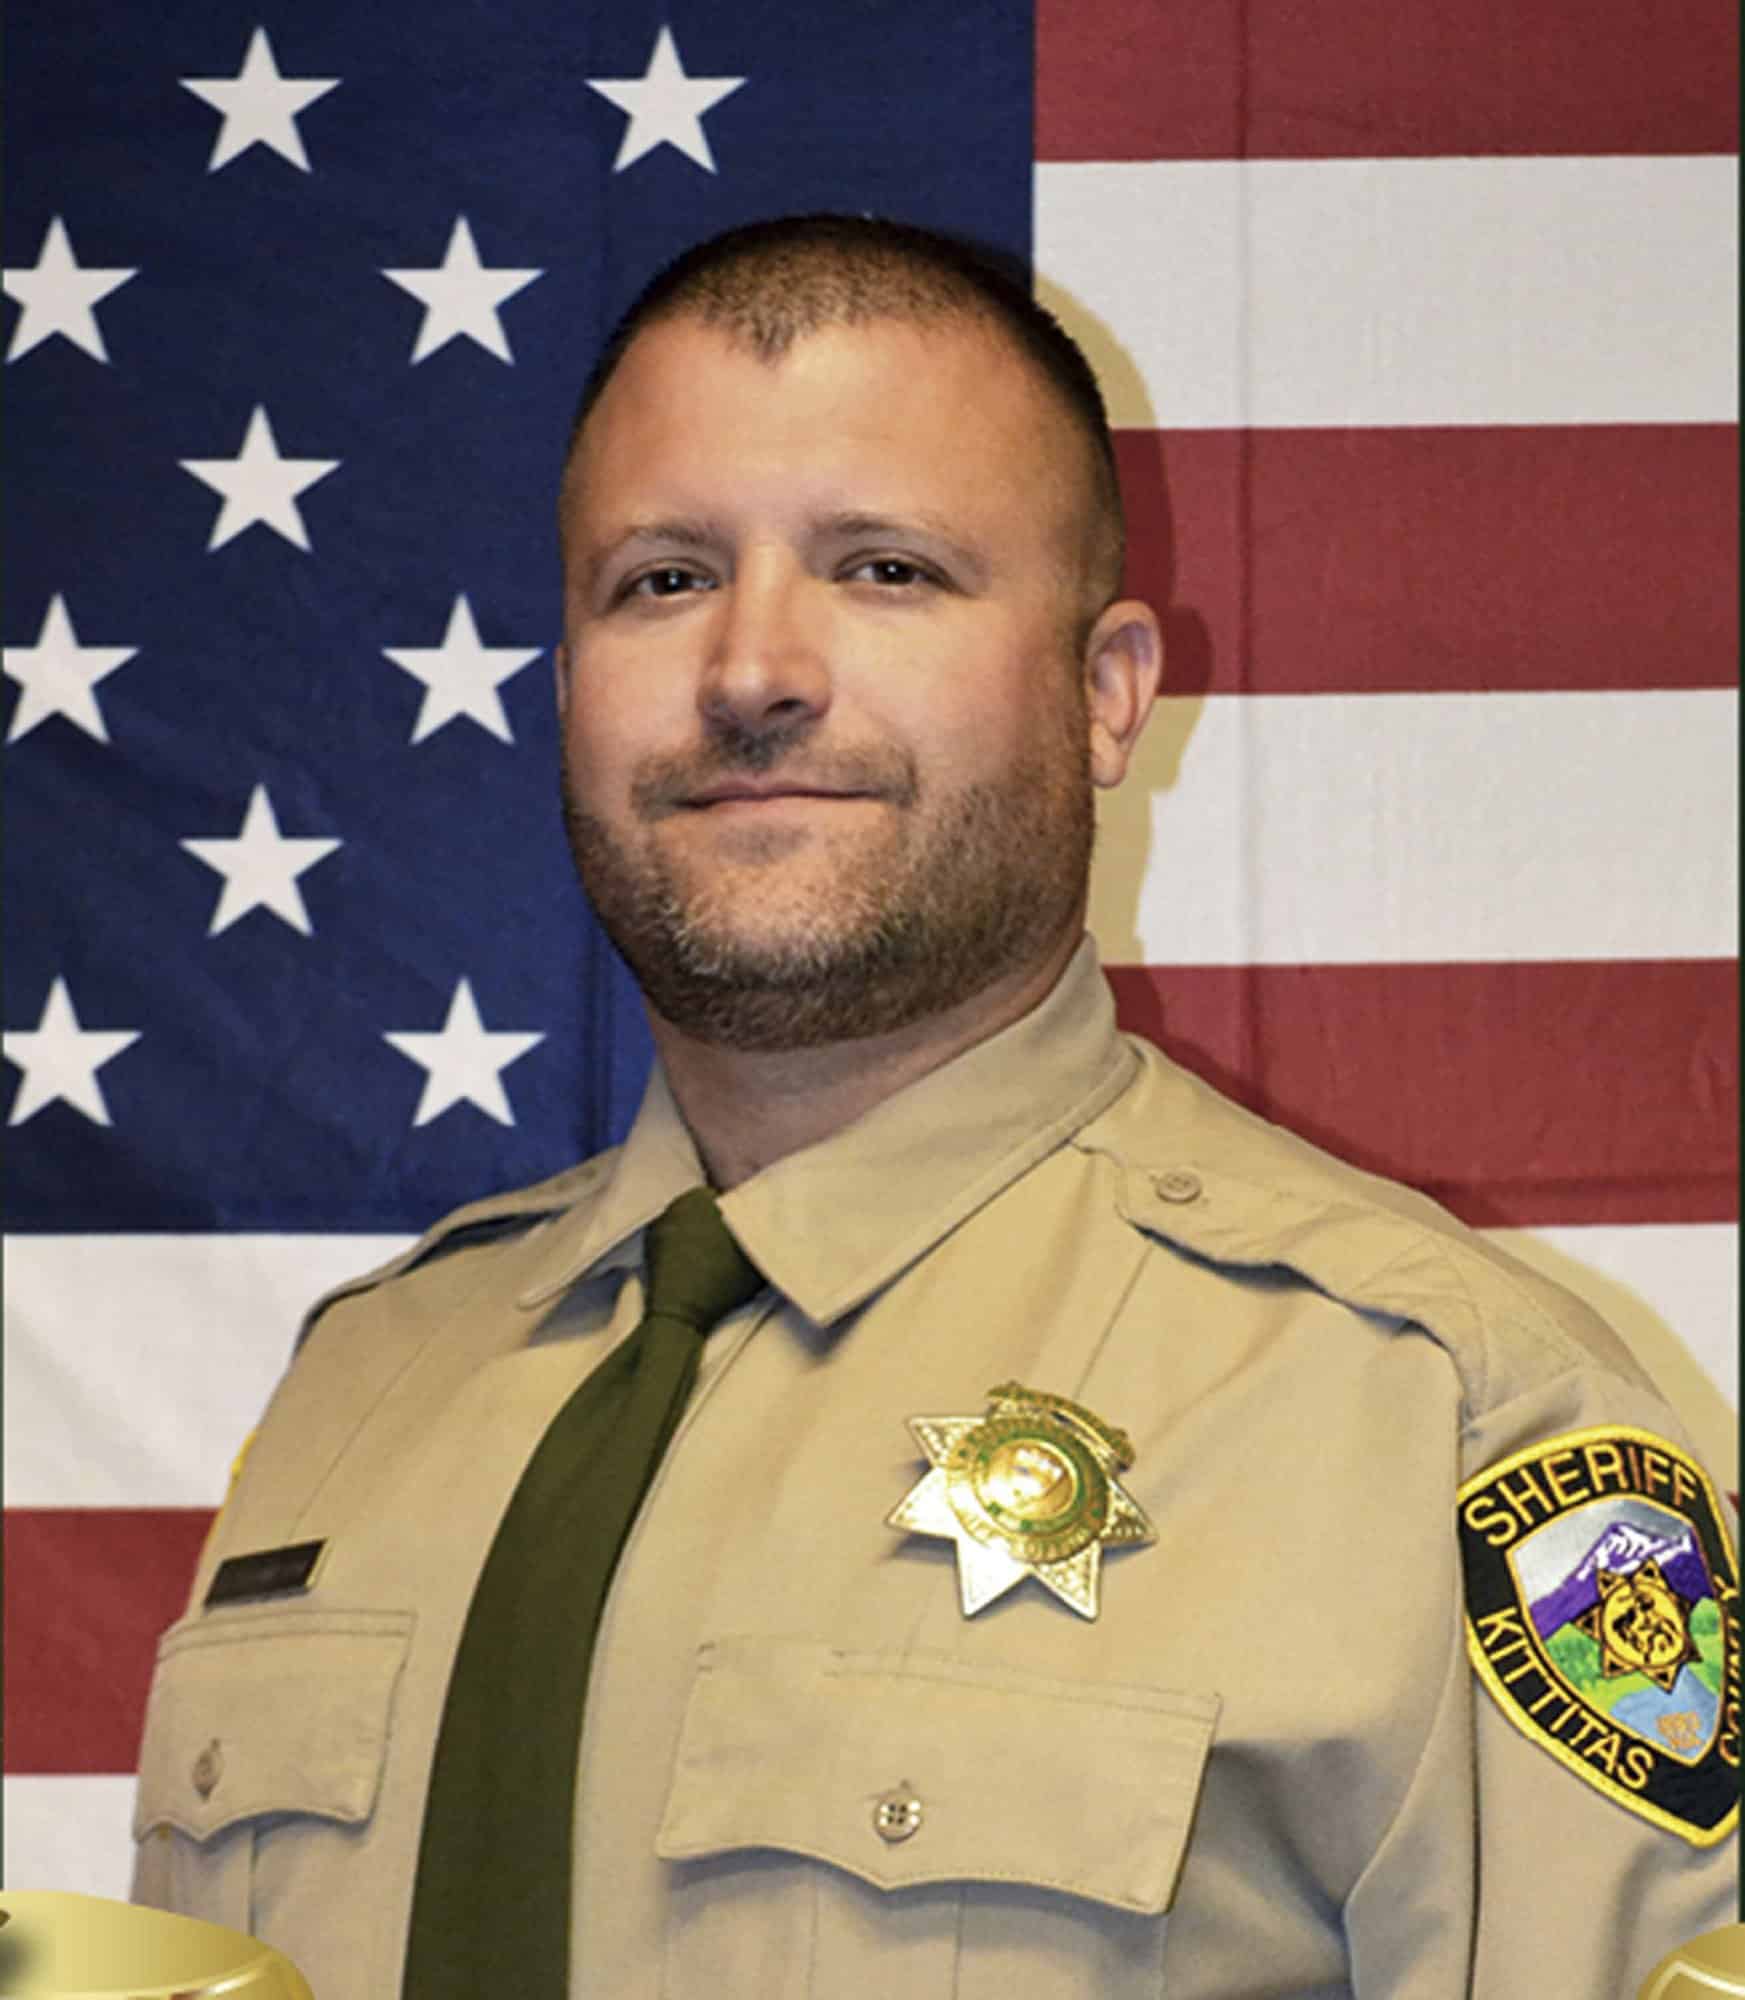 In Washington state the driver who violated traffic rules, opened fire on the officers, killing Deputy Sheriff